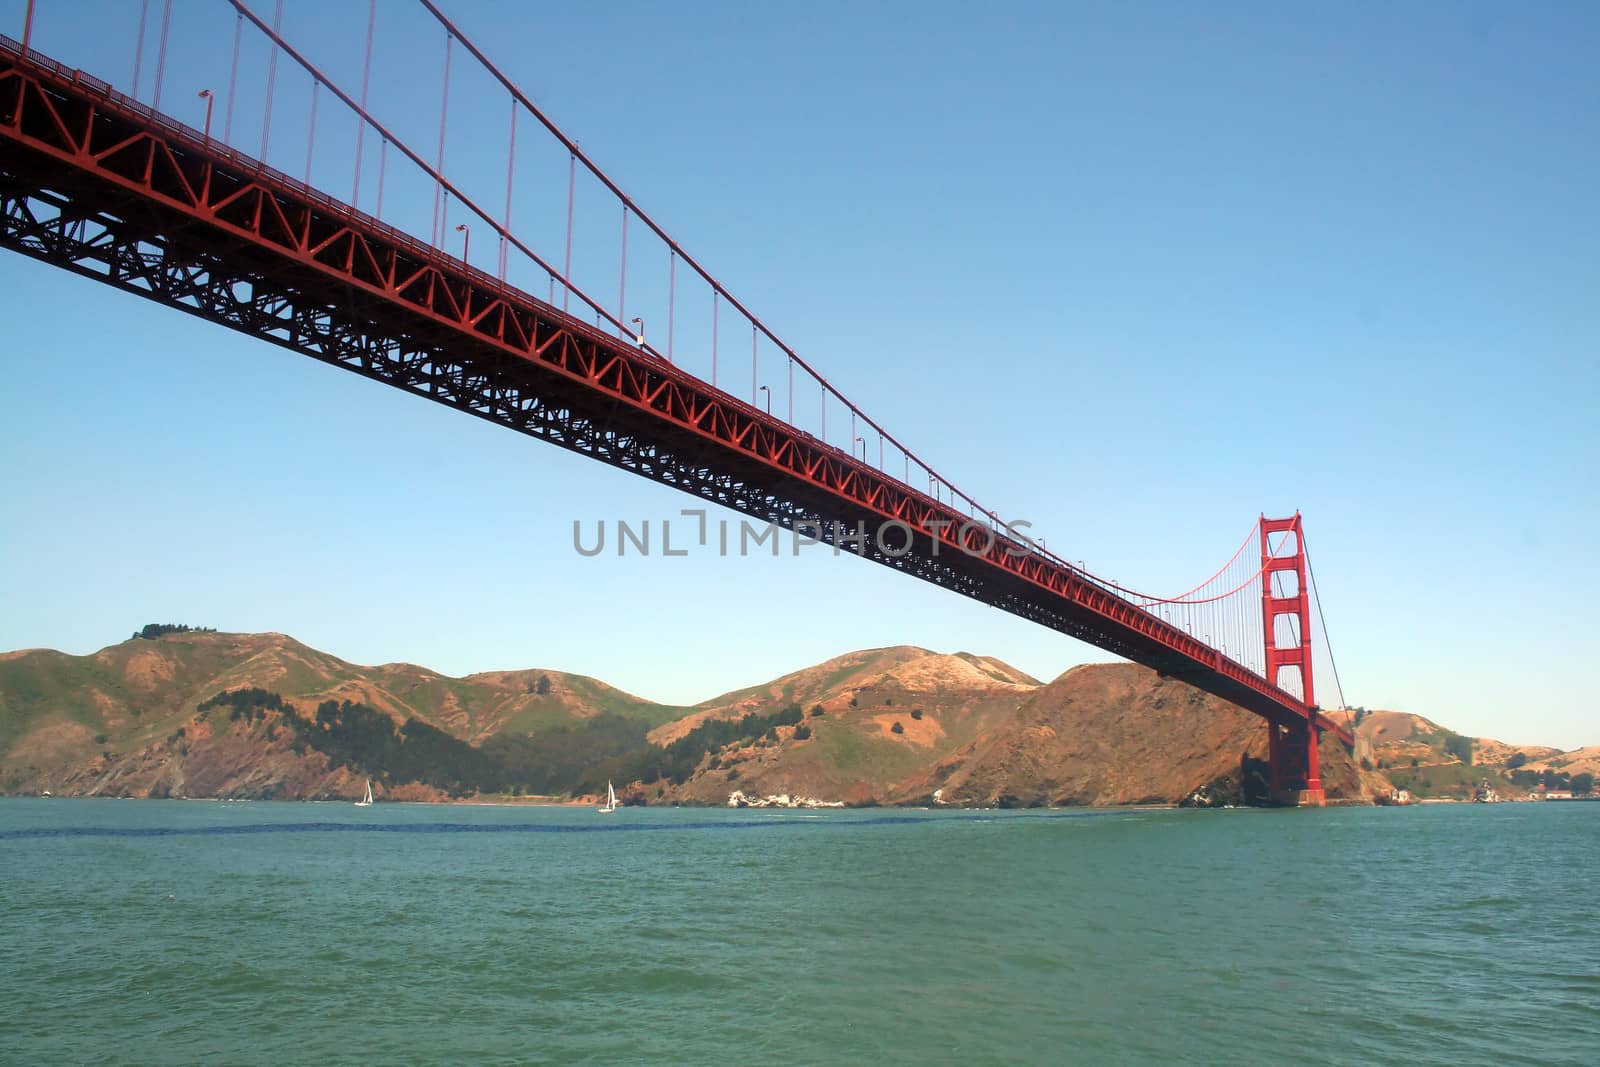 The Golden Gate Bridge in San Francisco from the water on a clear day.